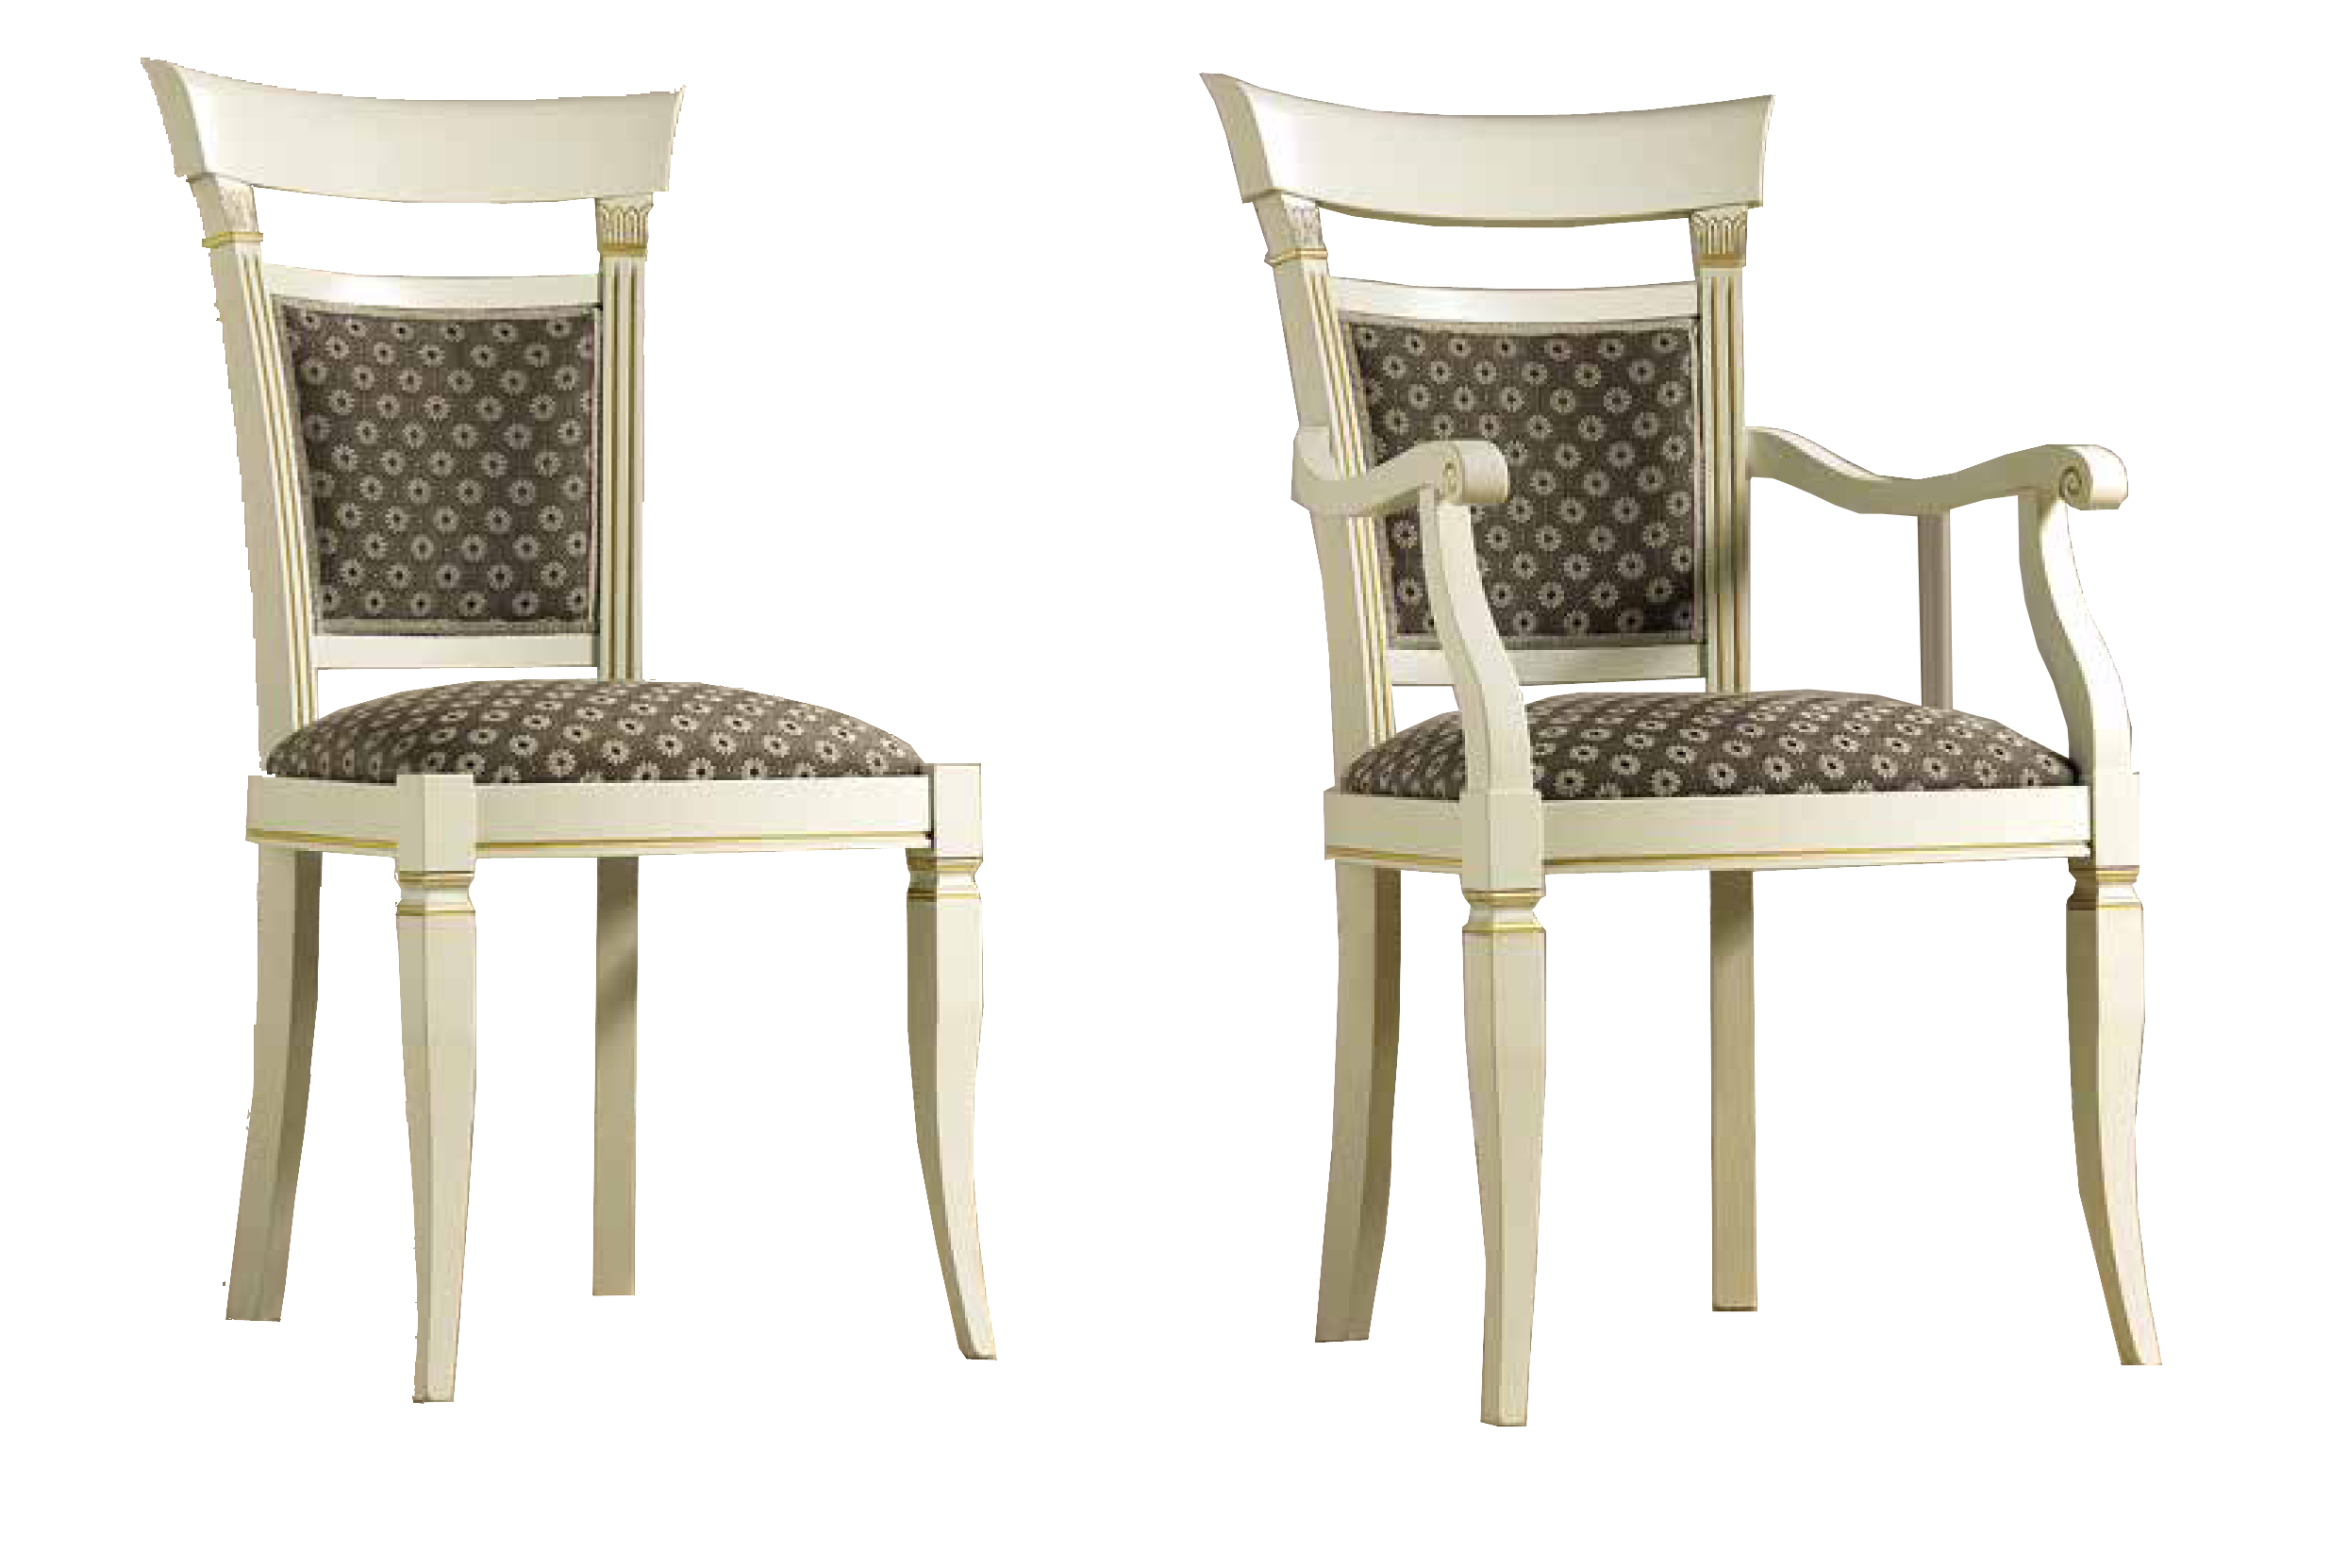 Brands Camel Modum Collection, Italy Treviso Chairs White Ash